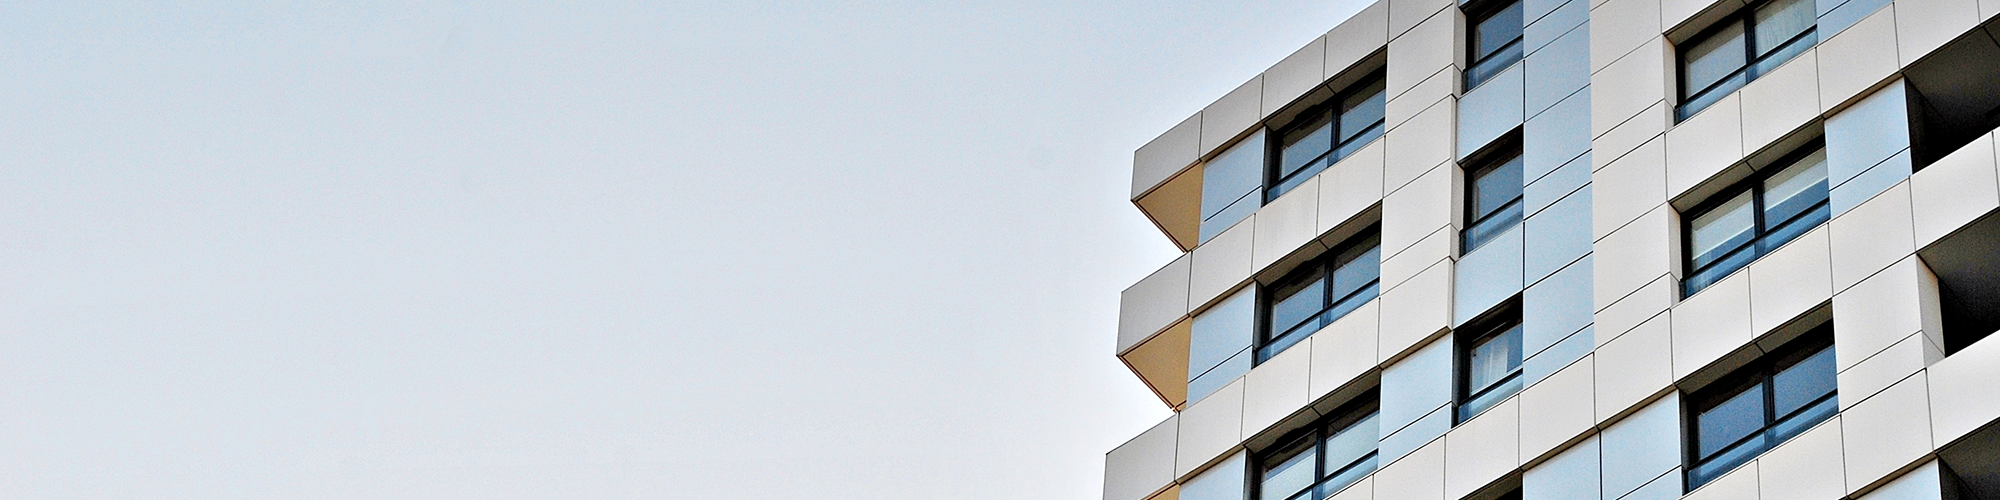 A block of leasehold flats against a clear sky. SAM Conveyancing explain: What is a Leasehold Management Company and how you can get rid of one